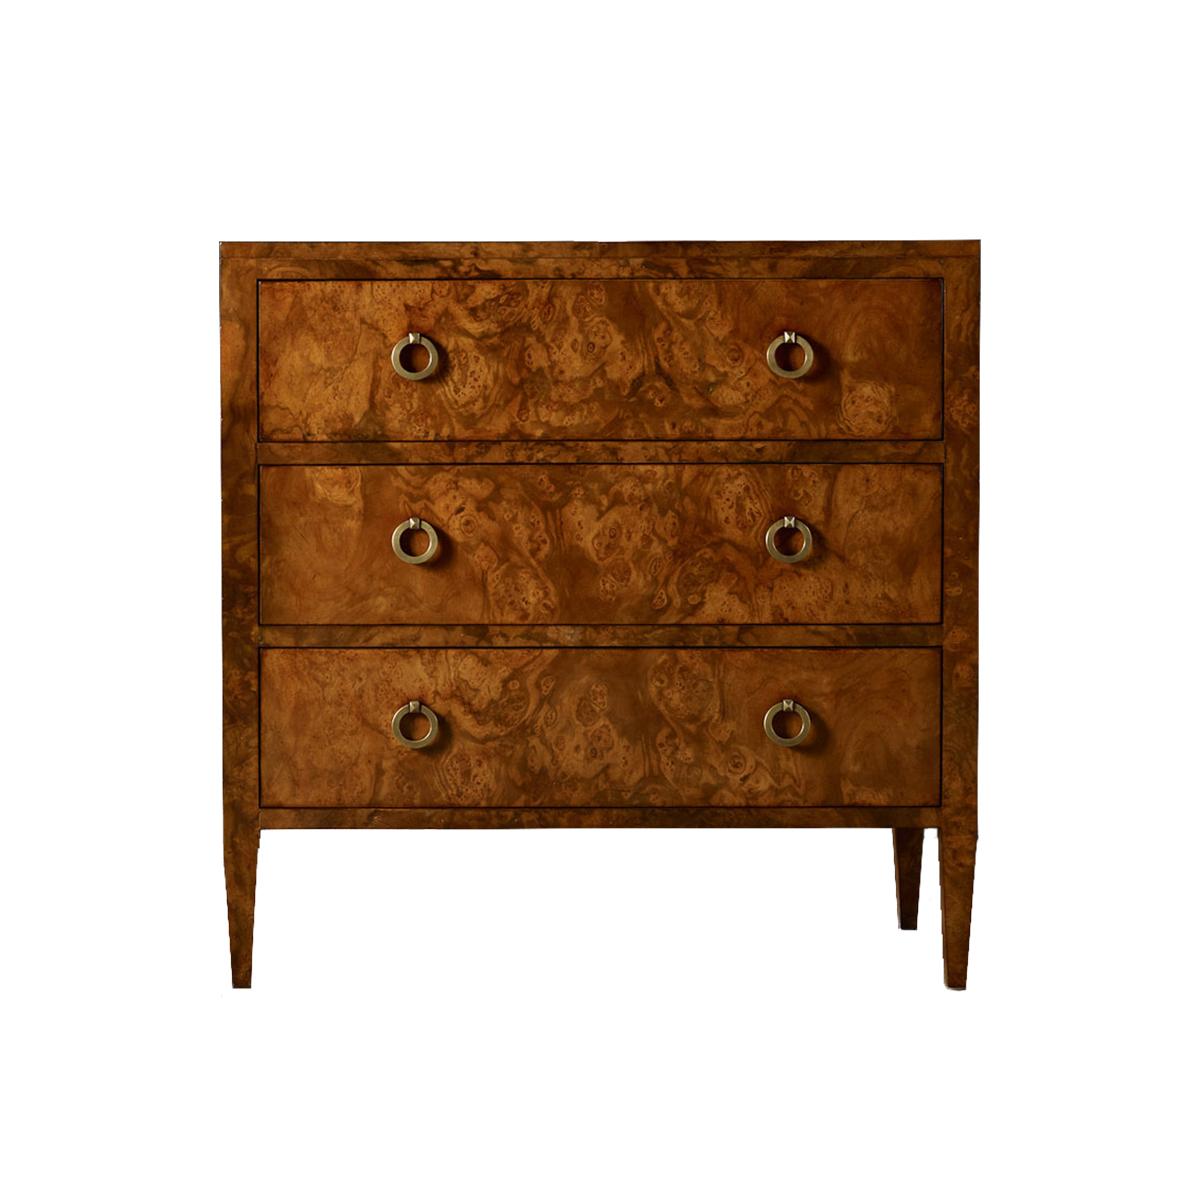 Burl Walnut Three Drawer Chest is a modern dresser with three long drawers and an exotic burl wood veneer. With modern antiqued brass ring pull handles and raised on square tapered legs.

Dimensions: 35